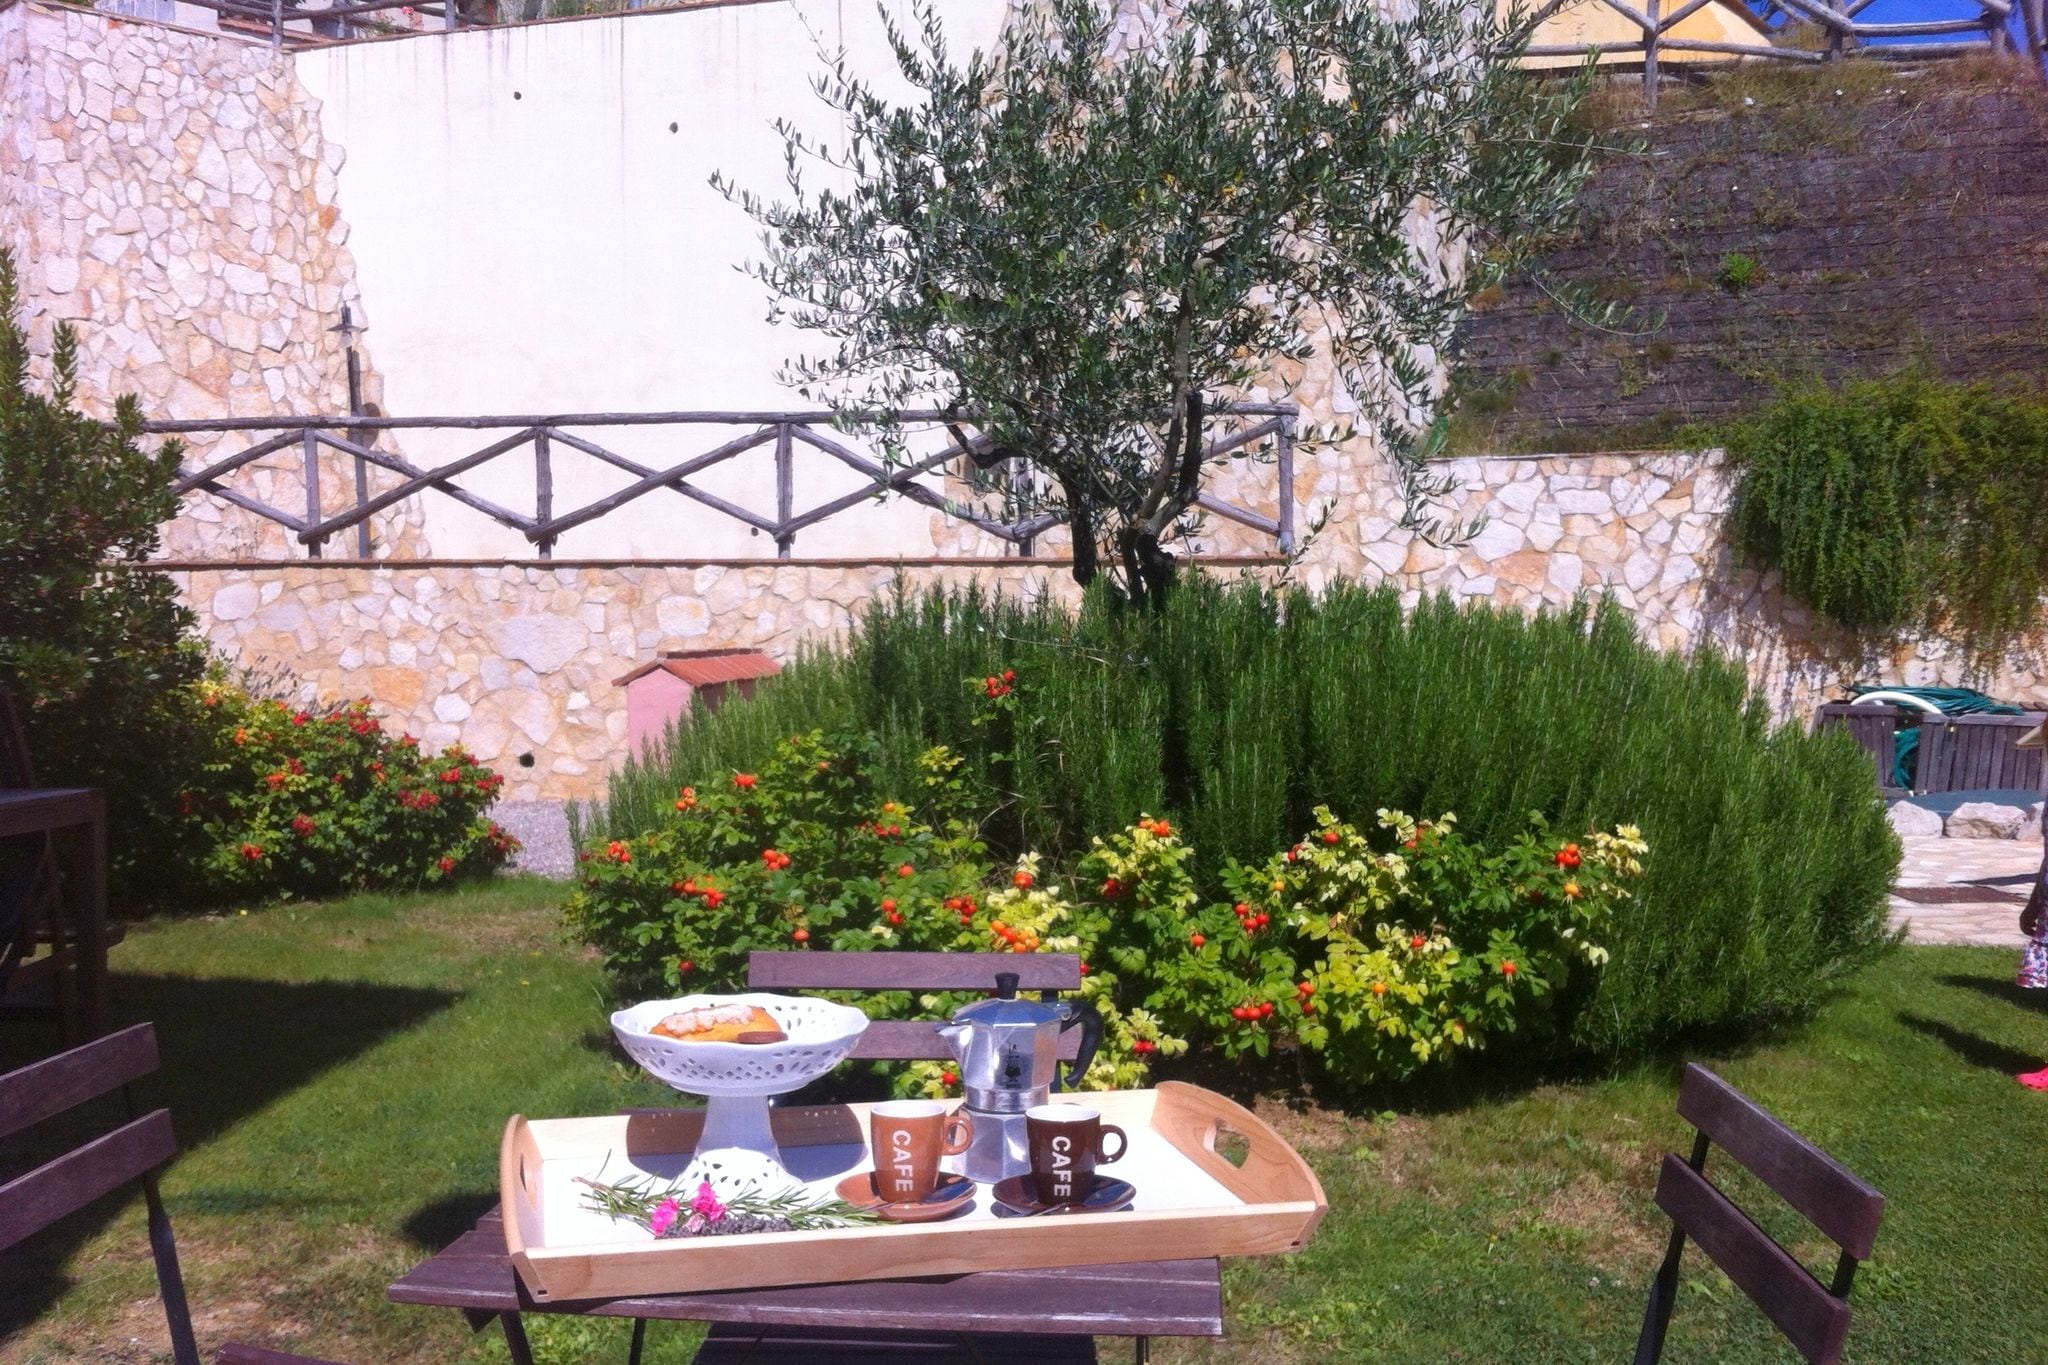 Cosy apartment with swimming pool and garden close to Volterra and S. Gimignano!